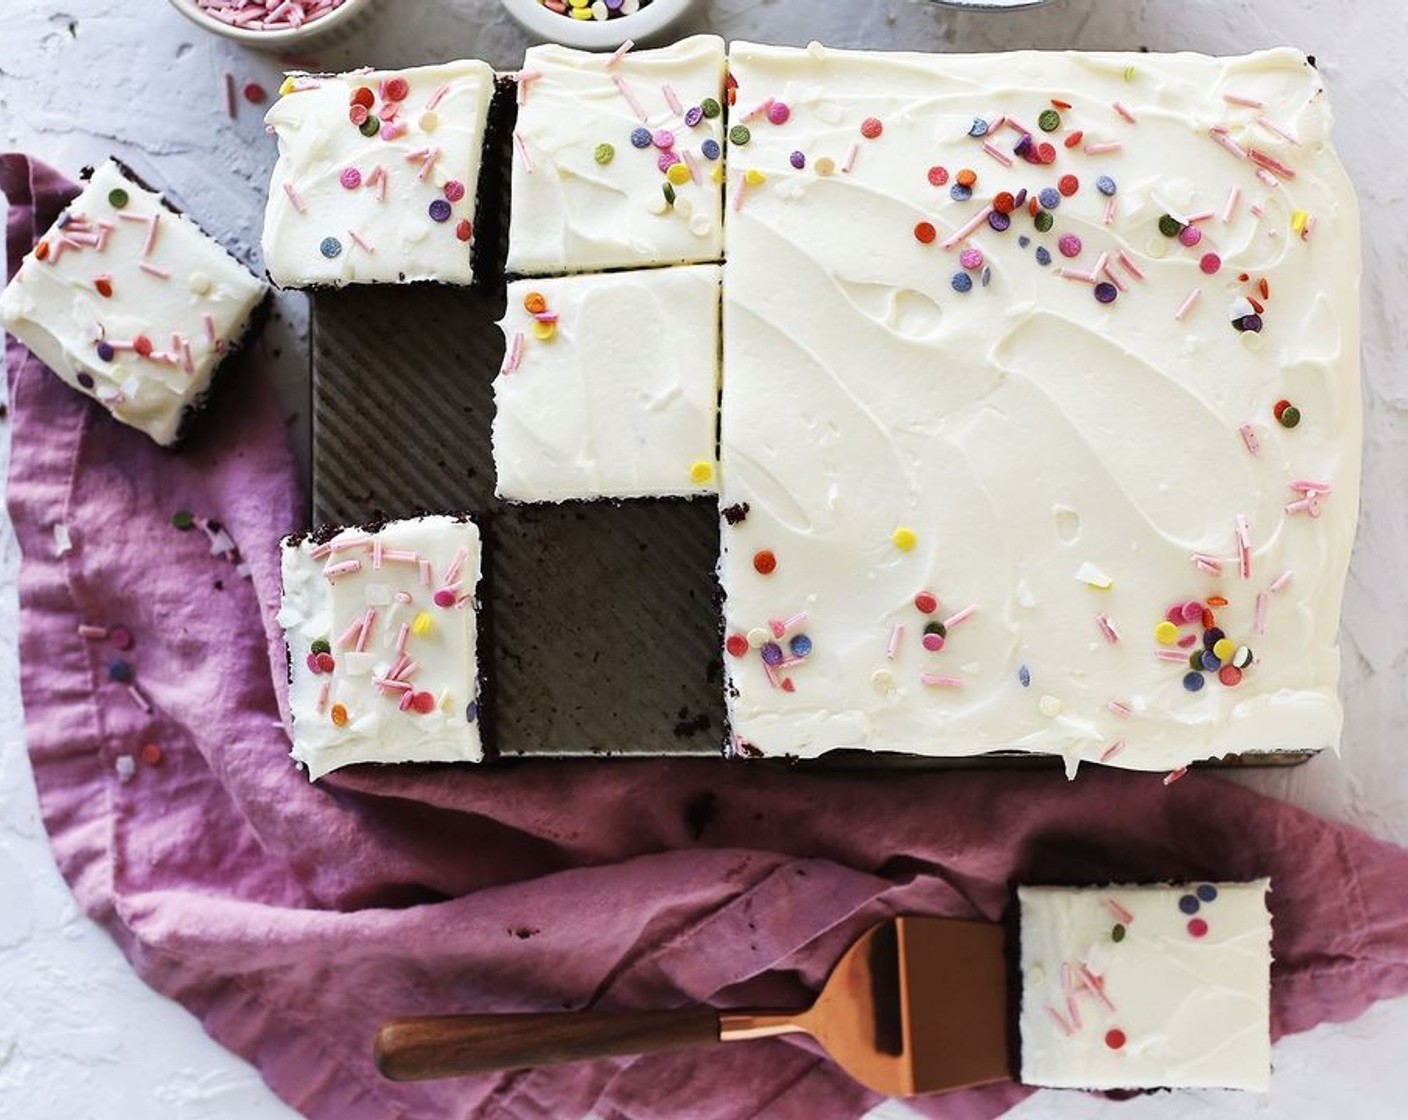 Chocolate Sheet Cake with Coconut Buttercream